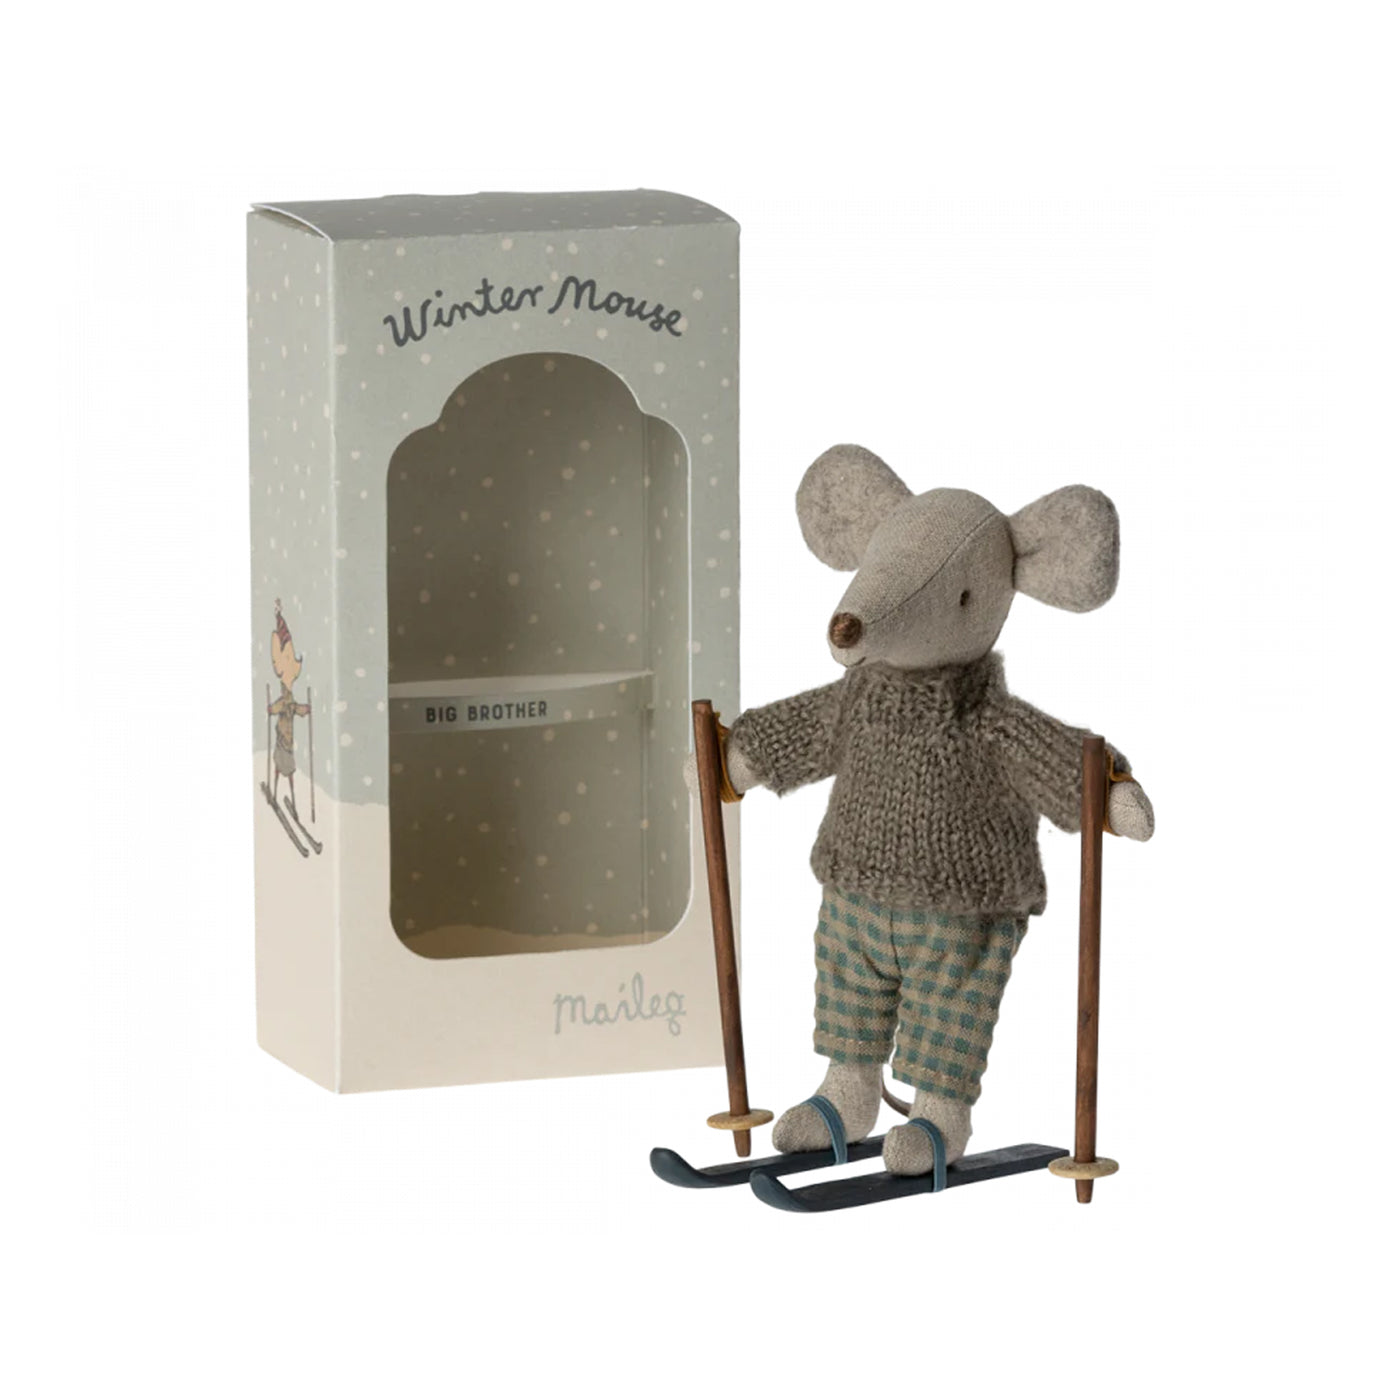 NEW Maileg Big Brother - Winter Mouse